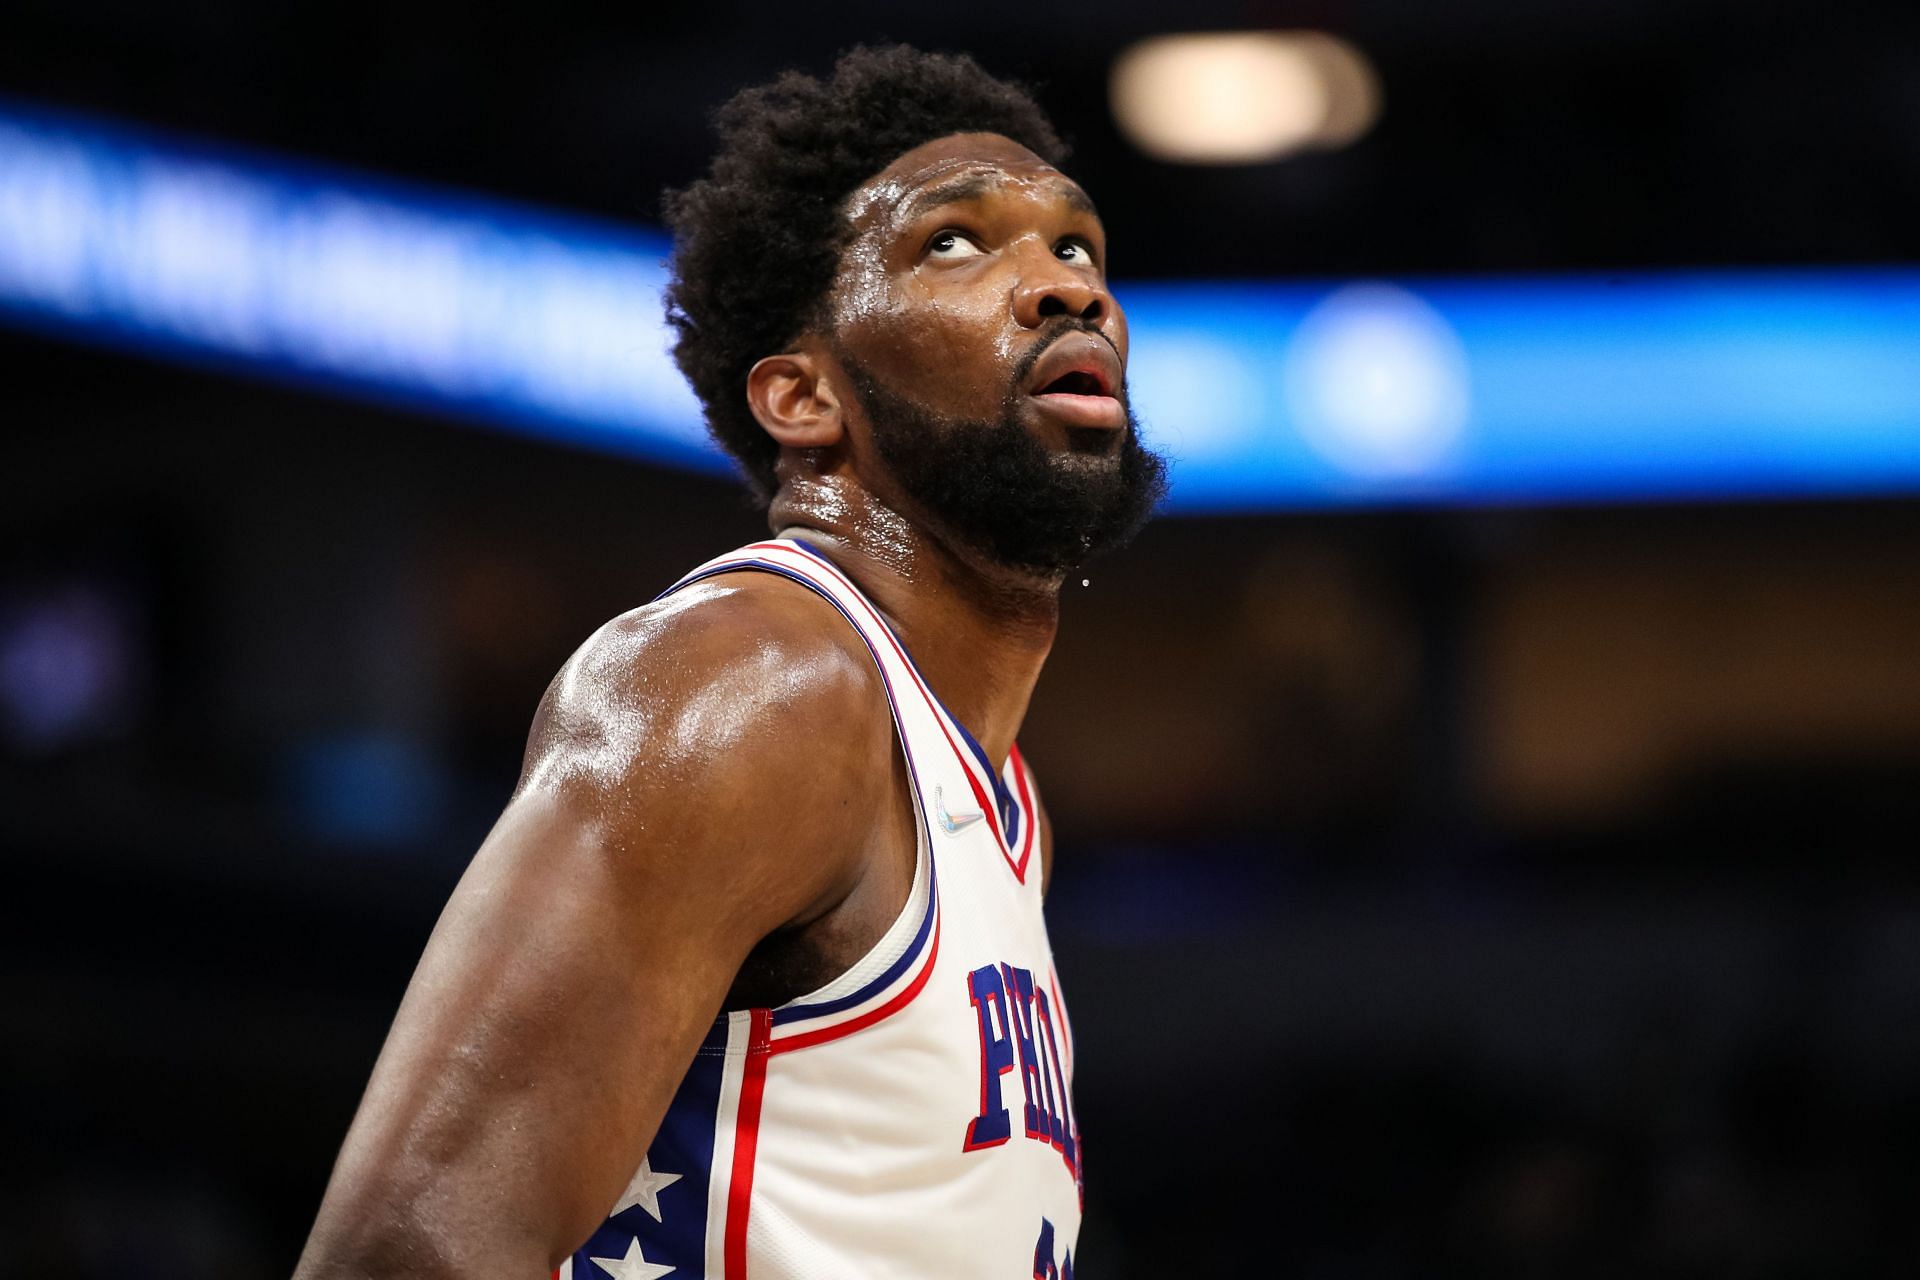 Joel Embiid #21 of the Philadelphia 76ers looks on against the Minnesota Timberwolves in the first quarter of the game at Target Center on February 25, 2022 in Minneapolis, Minnesota. The 76ers defeated the Timberwolves 133-102.